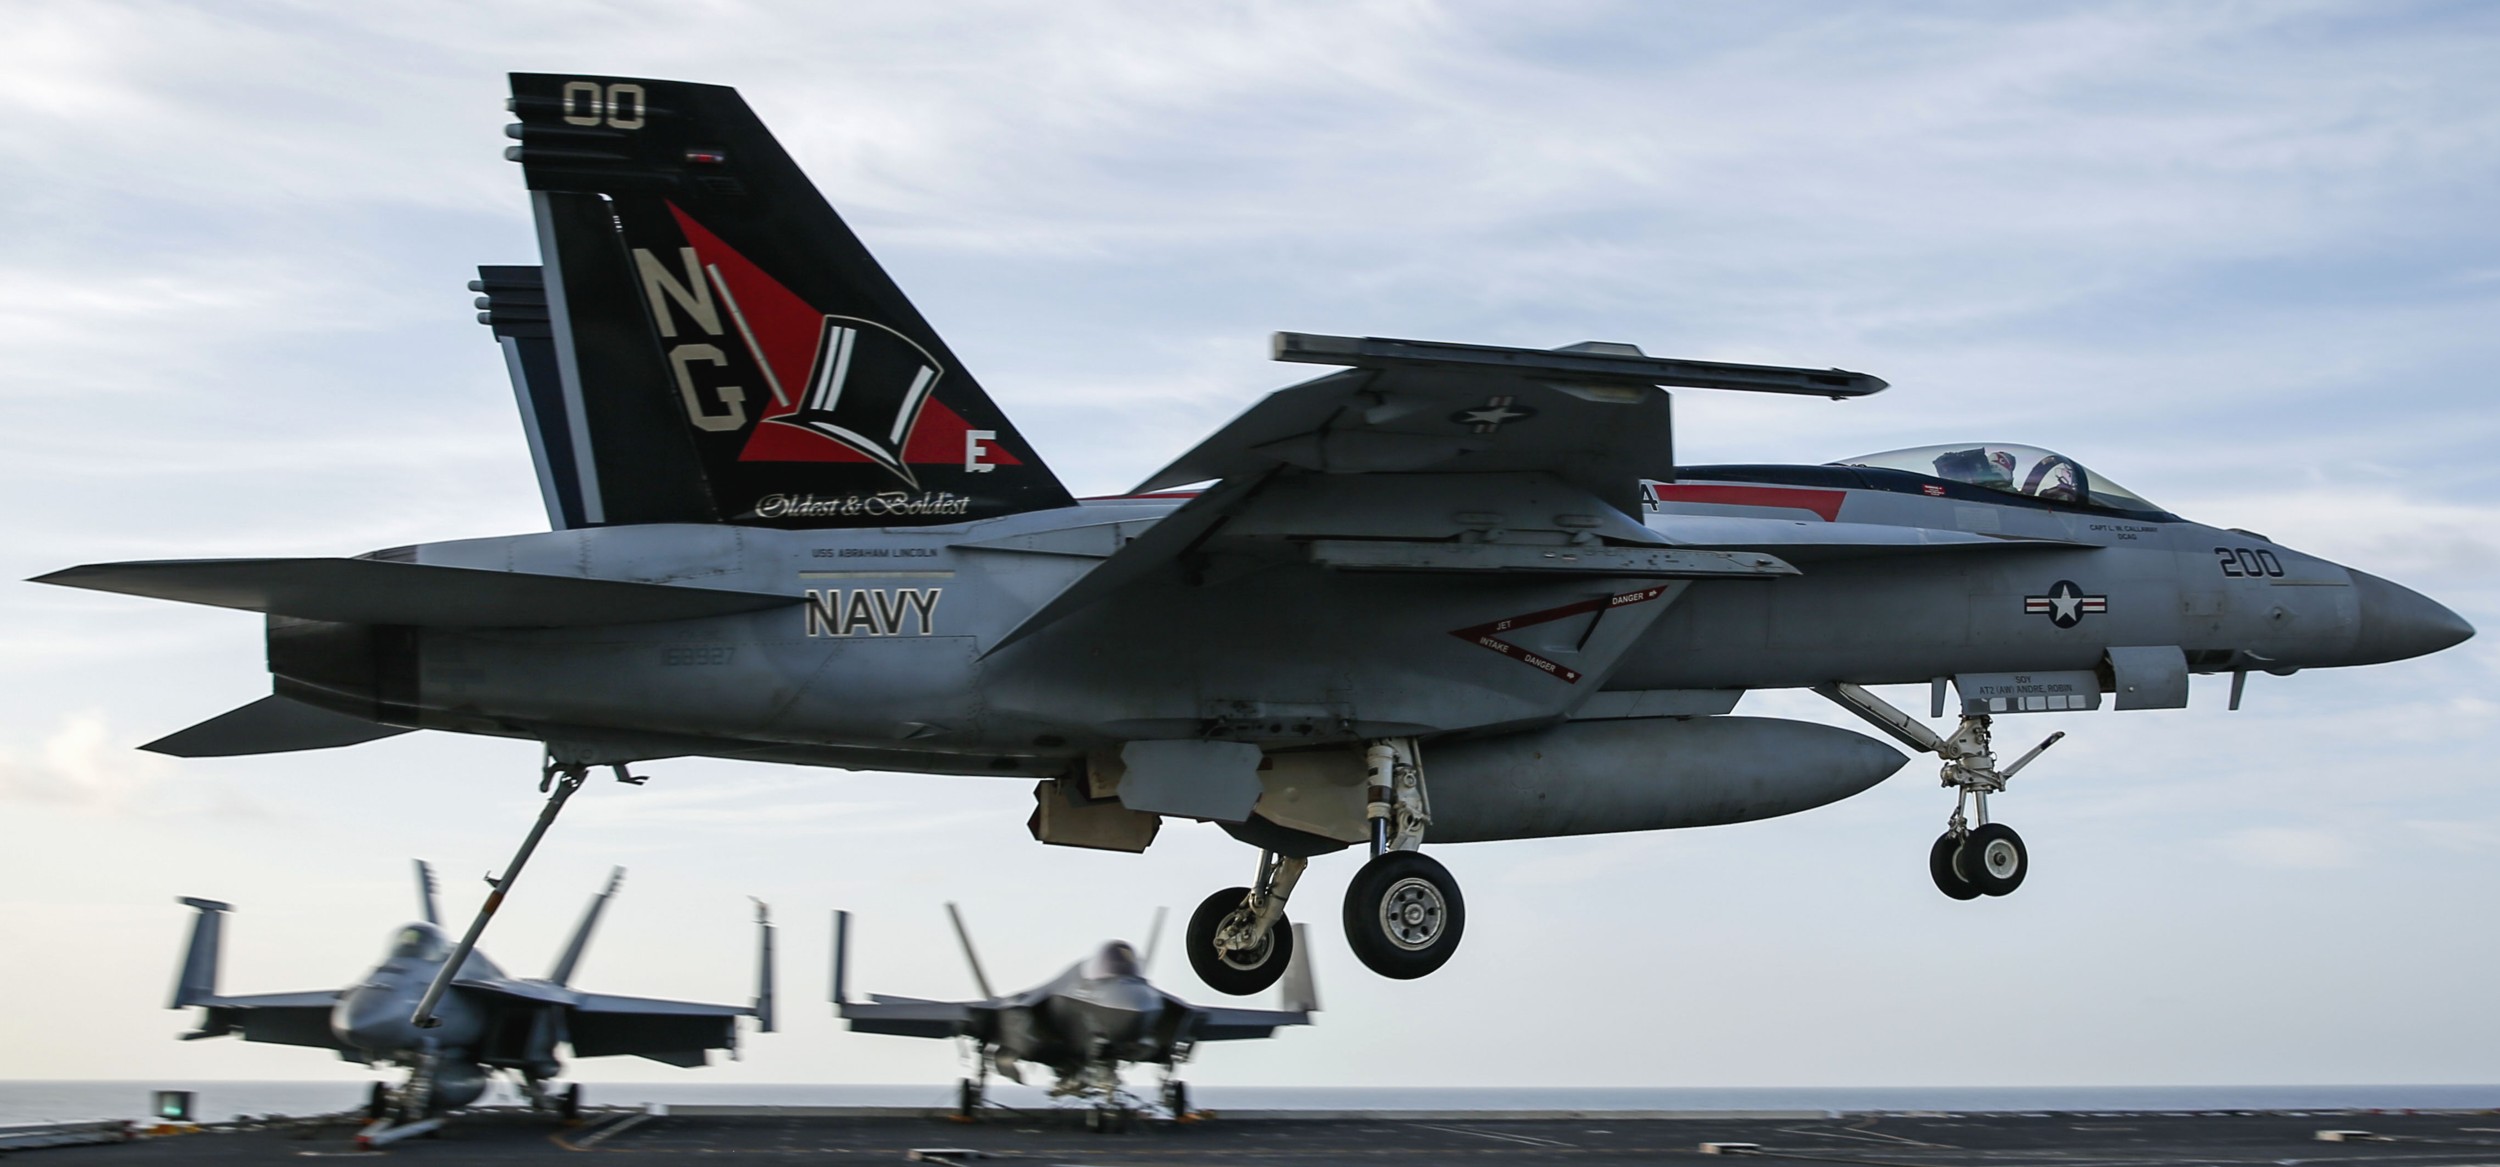 vfa-14 tophatters strike fighter squadron f/a-18e super hornet cvn-72 uss abraham lincoln cvw-9 us navy 54